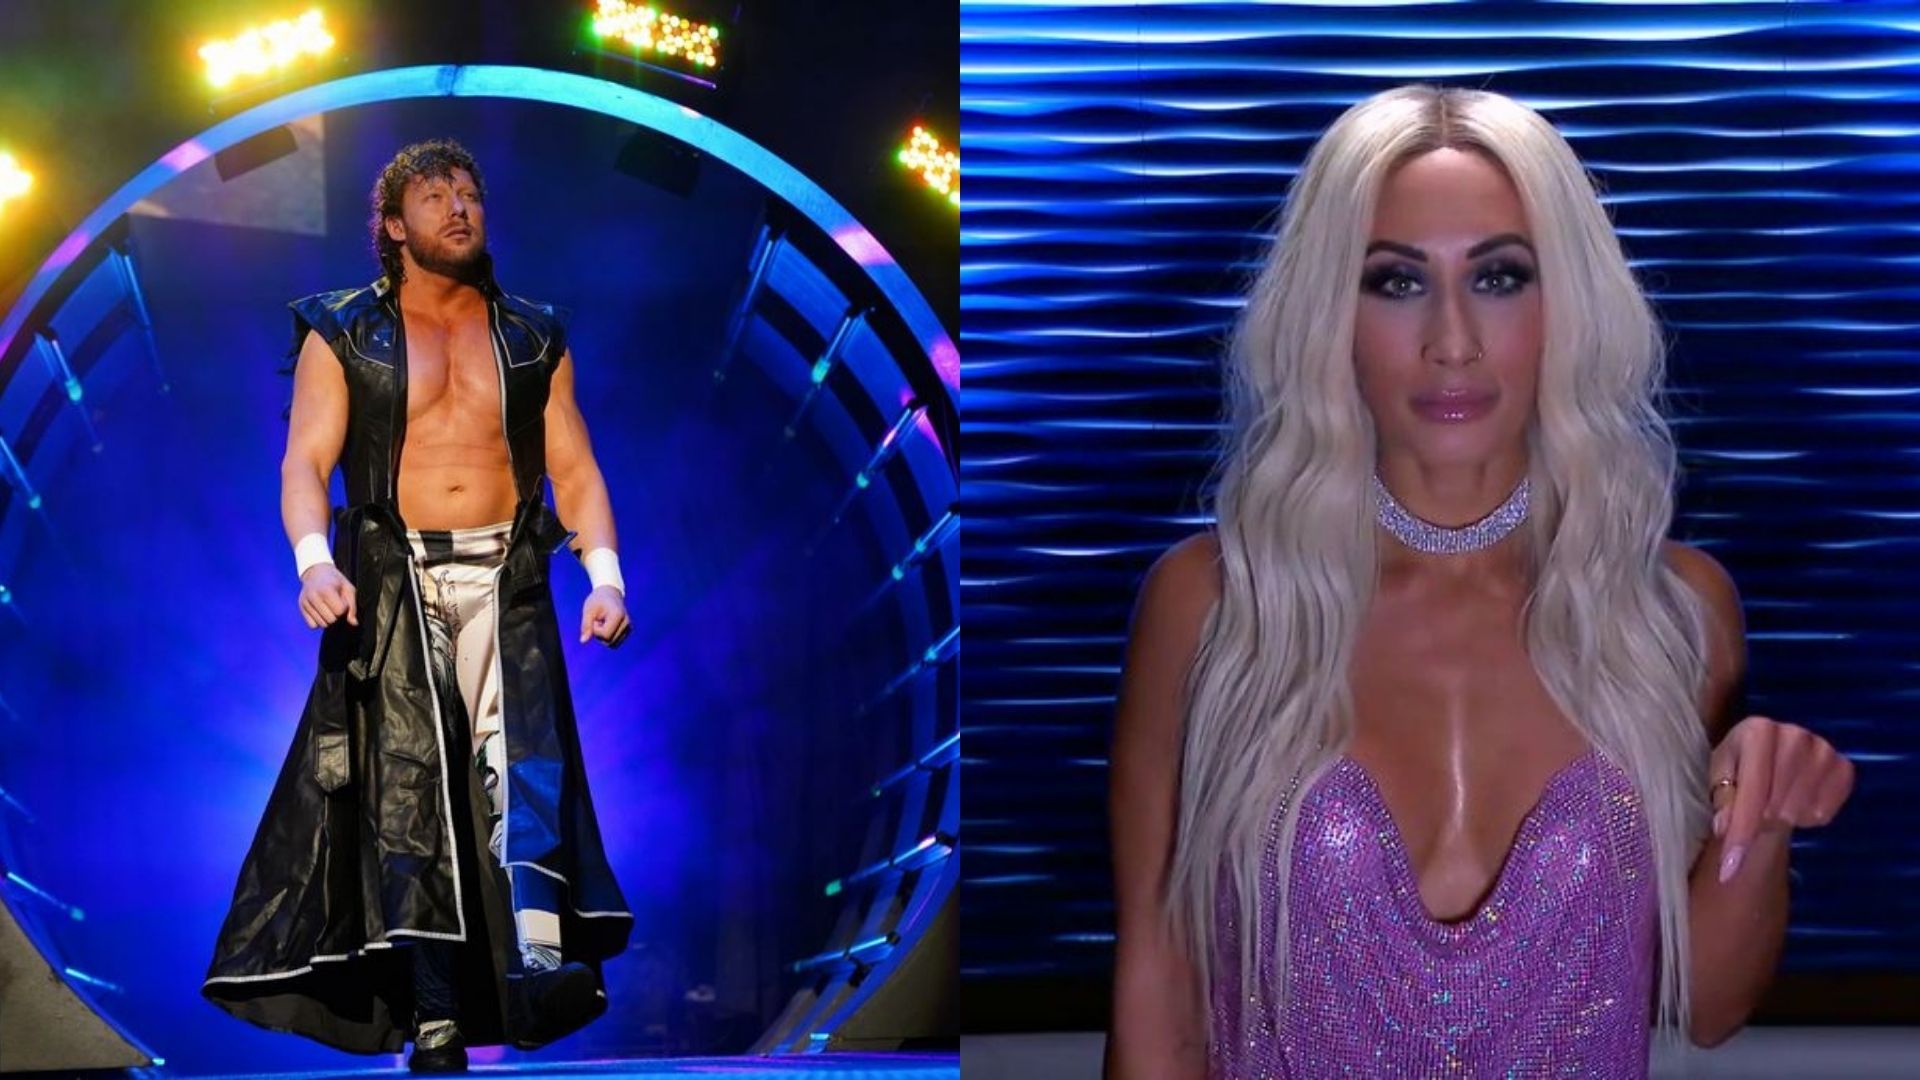 Kenny Omega had a hilarious take on the new entrance of Carmella